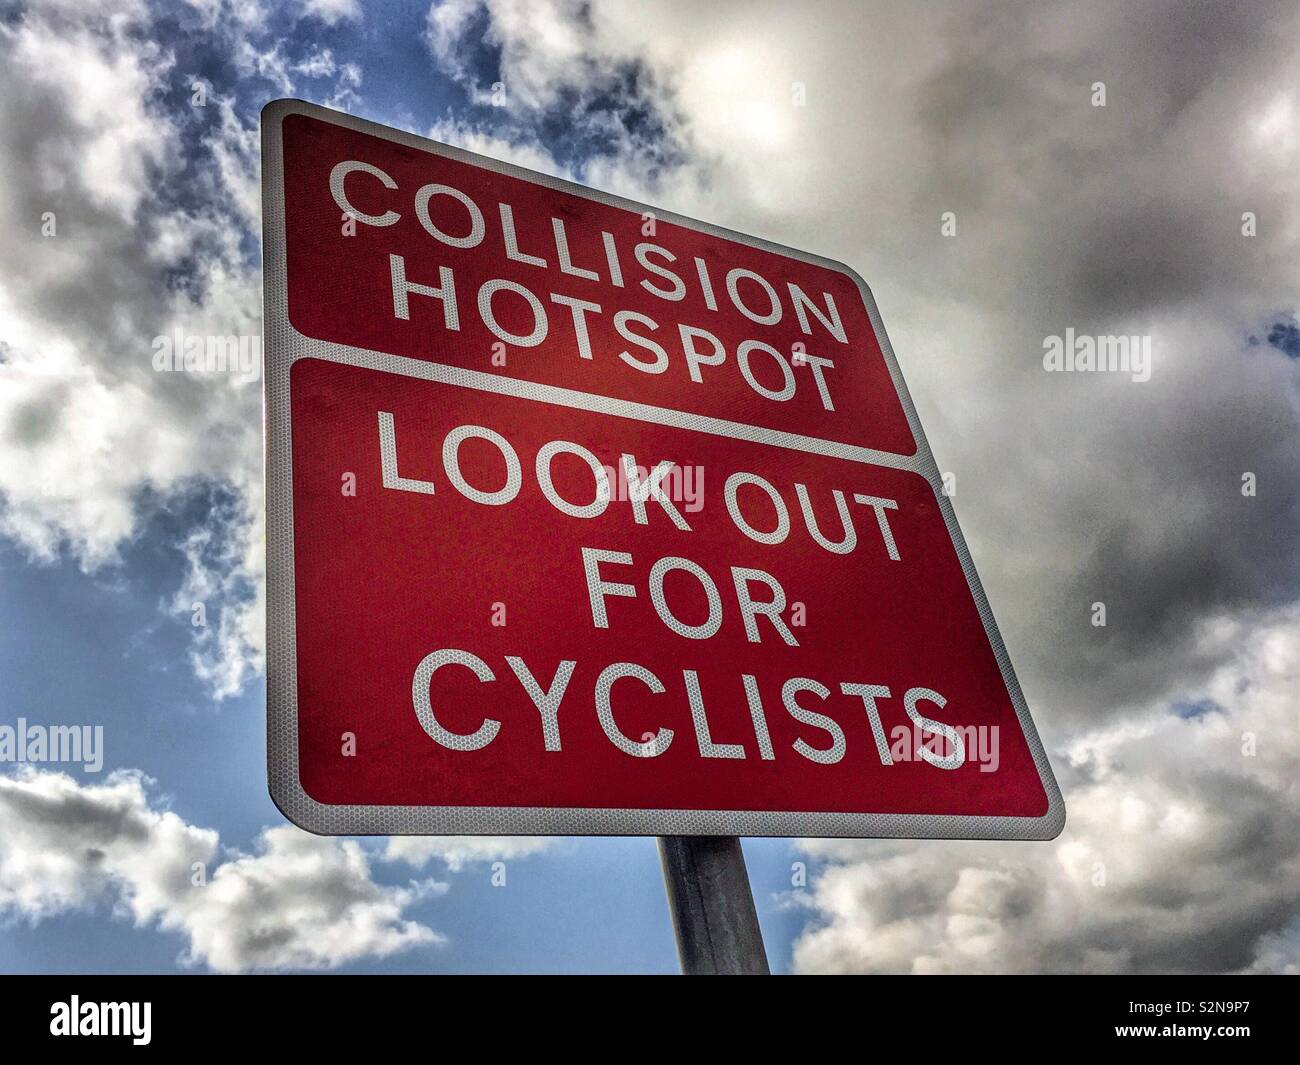 Collision hotspot, Look out for cyclists warning sign in England Stock Photo